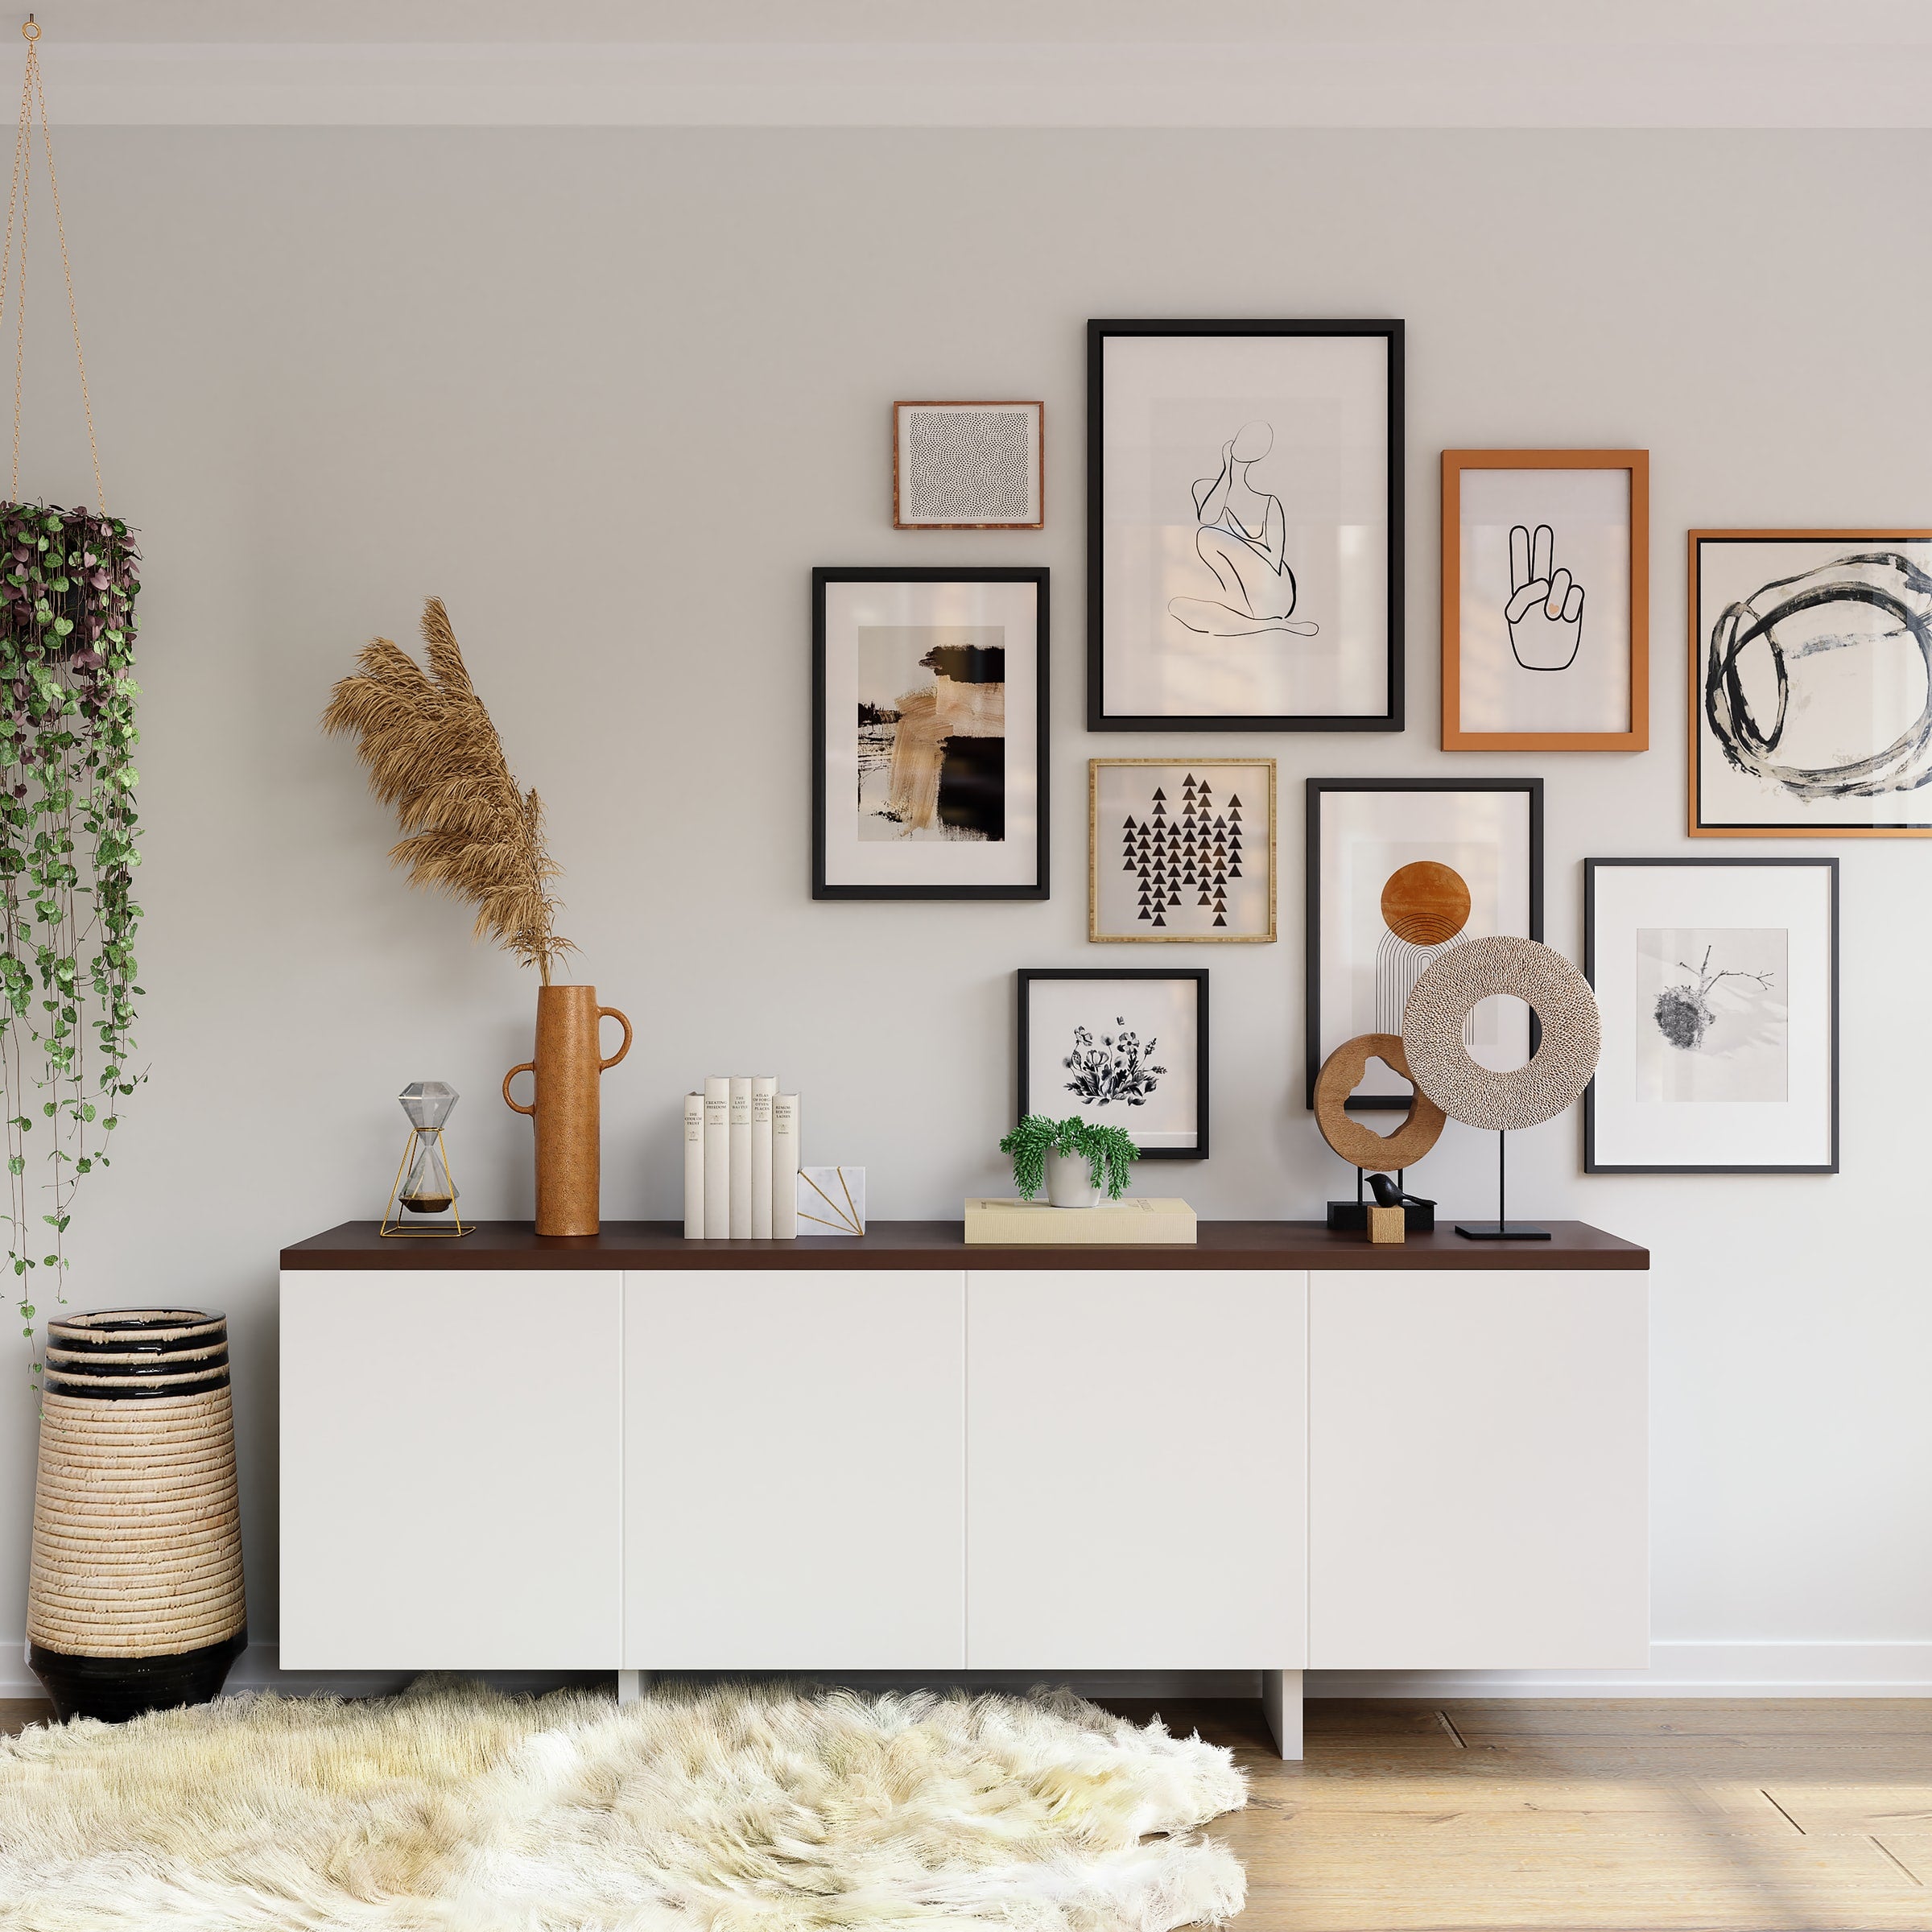 How to Use Minimalist Arts for Your Modern Home Decor